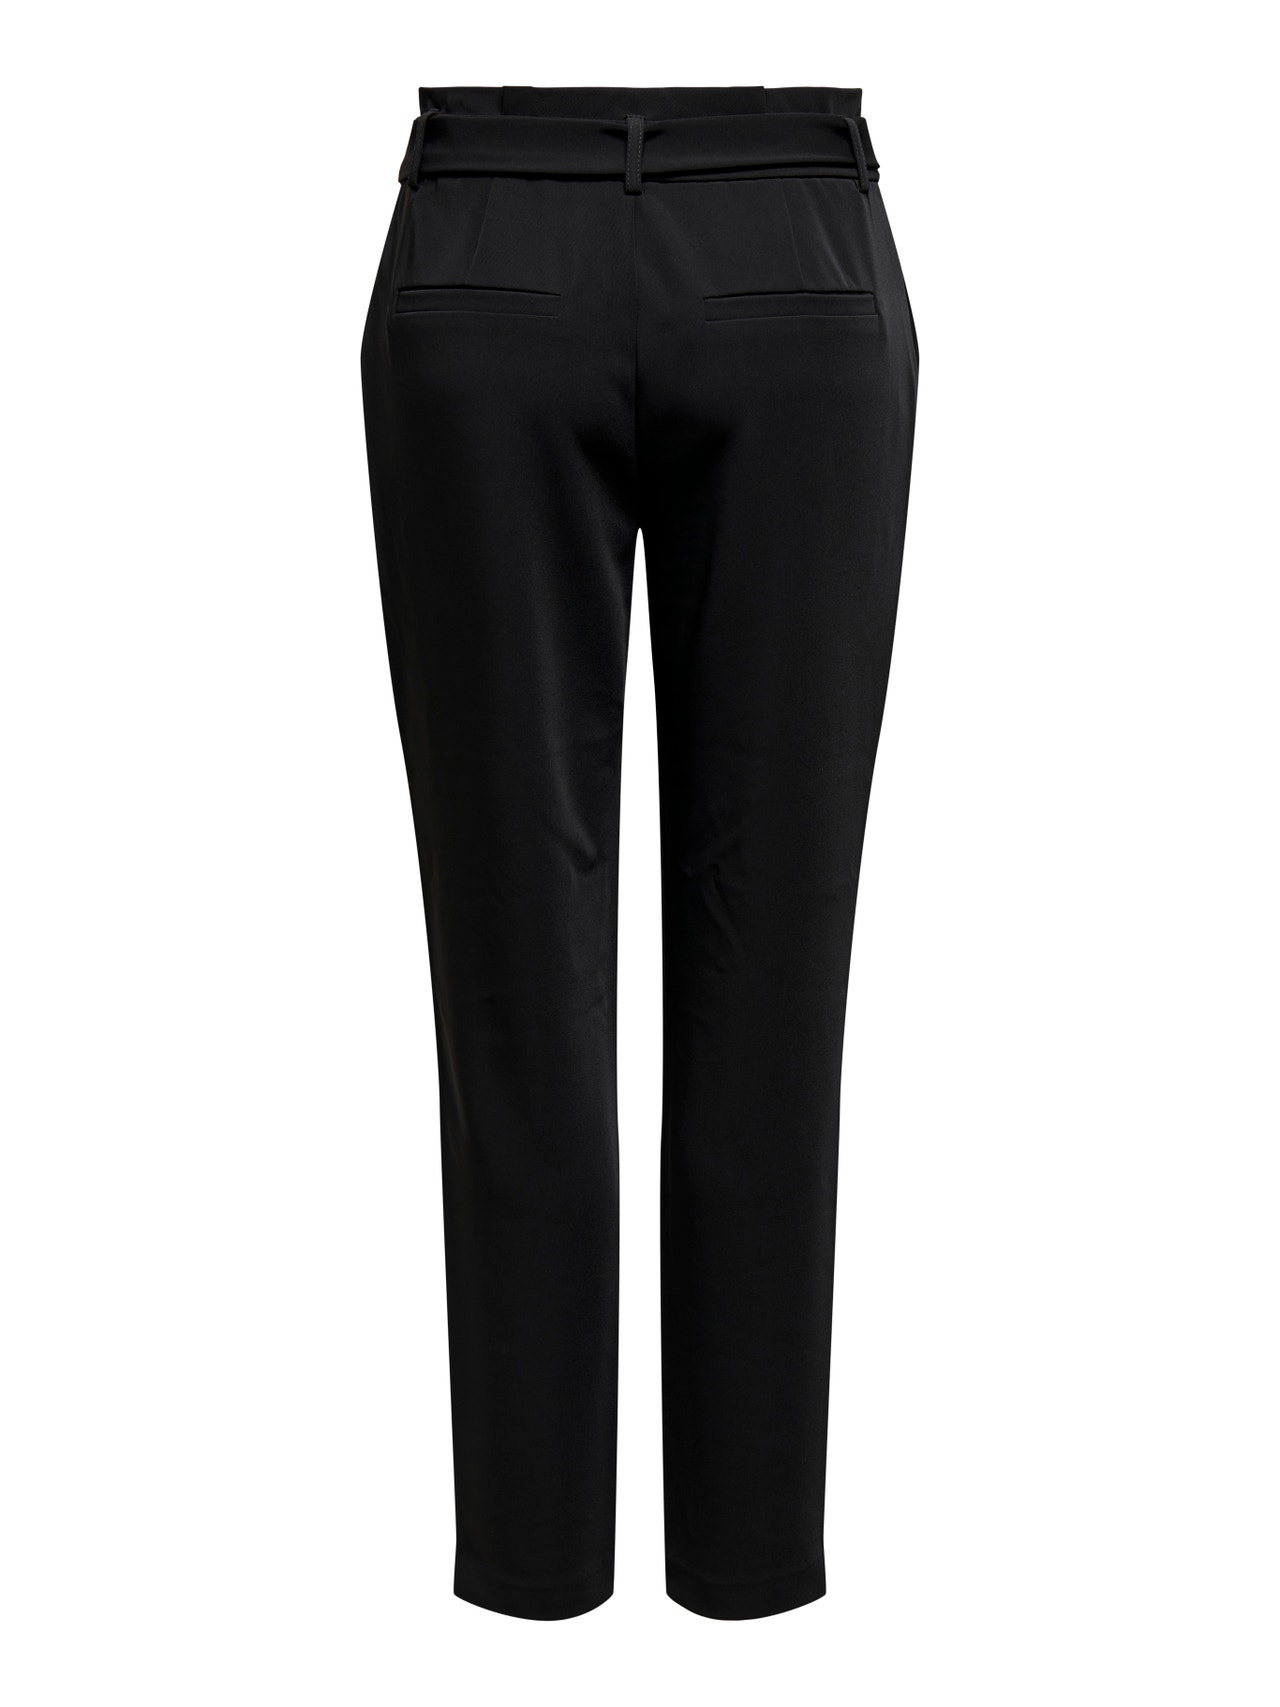 ONLY Tall taille moyenne paperbag Pantalon -Black - 15258638